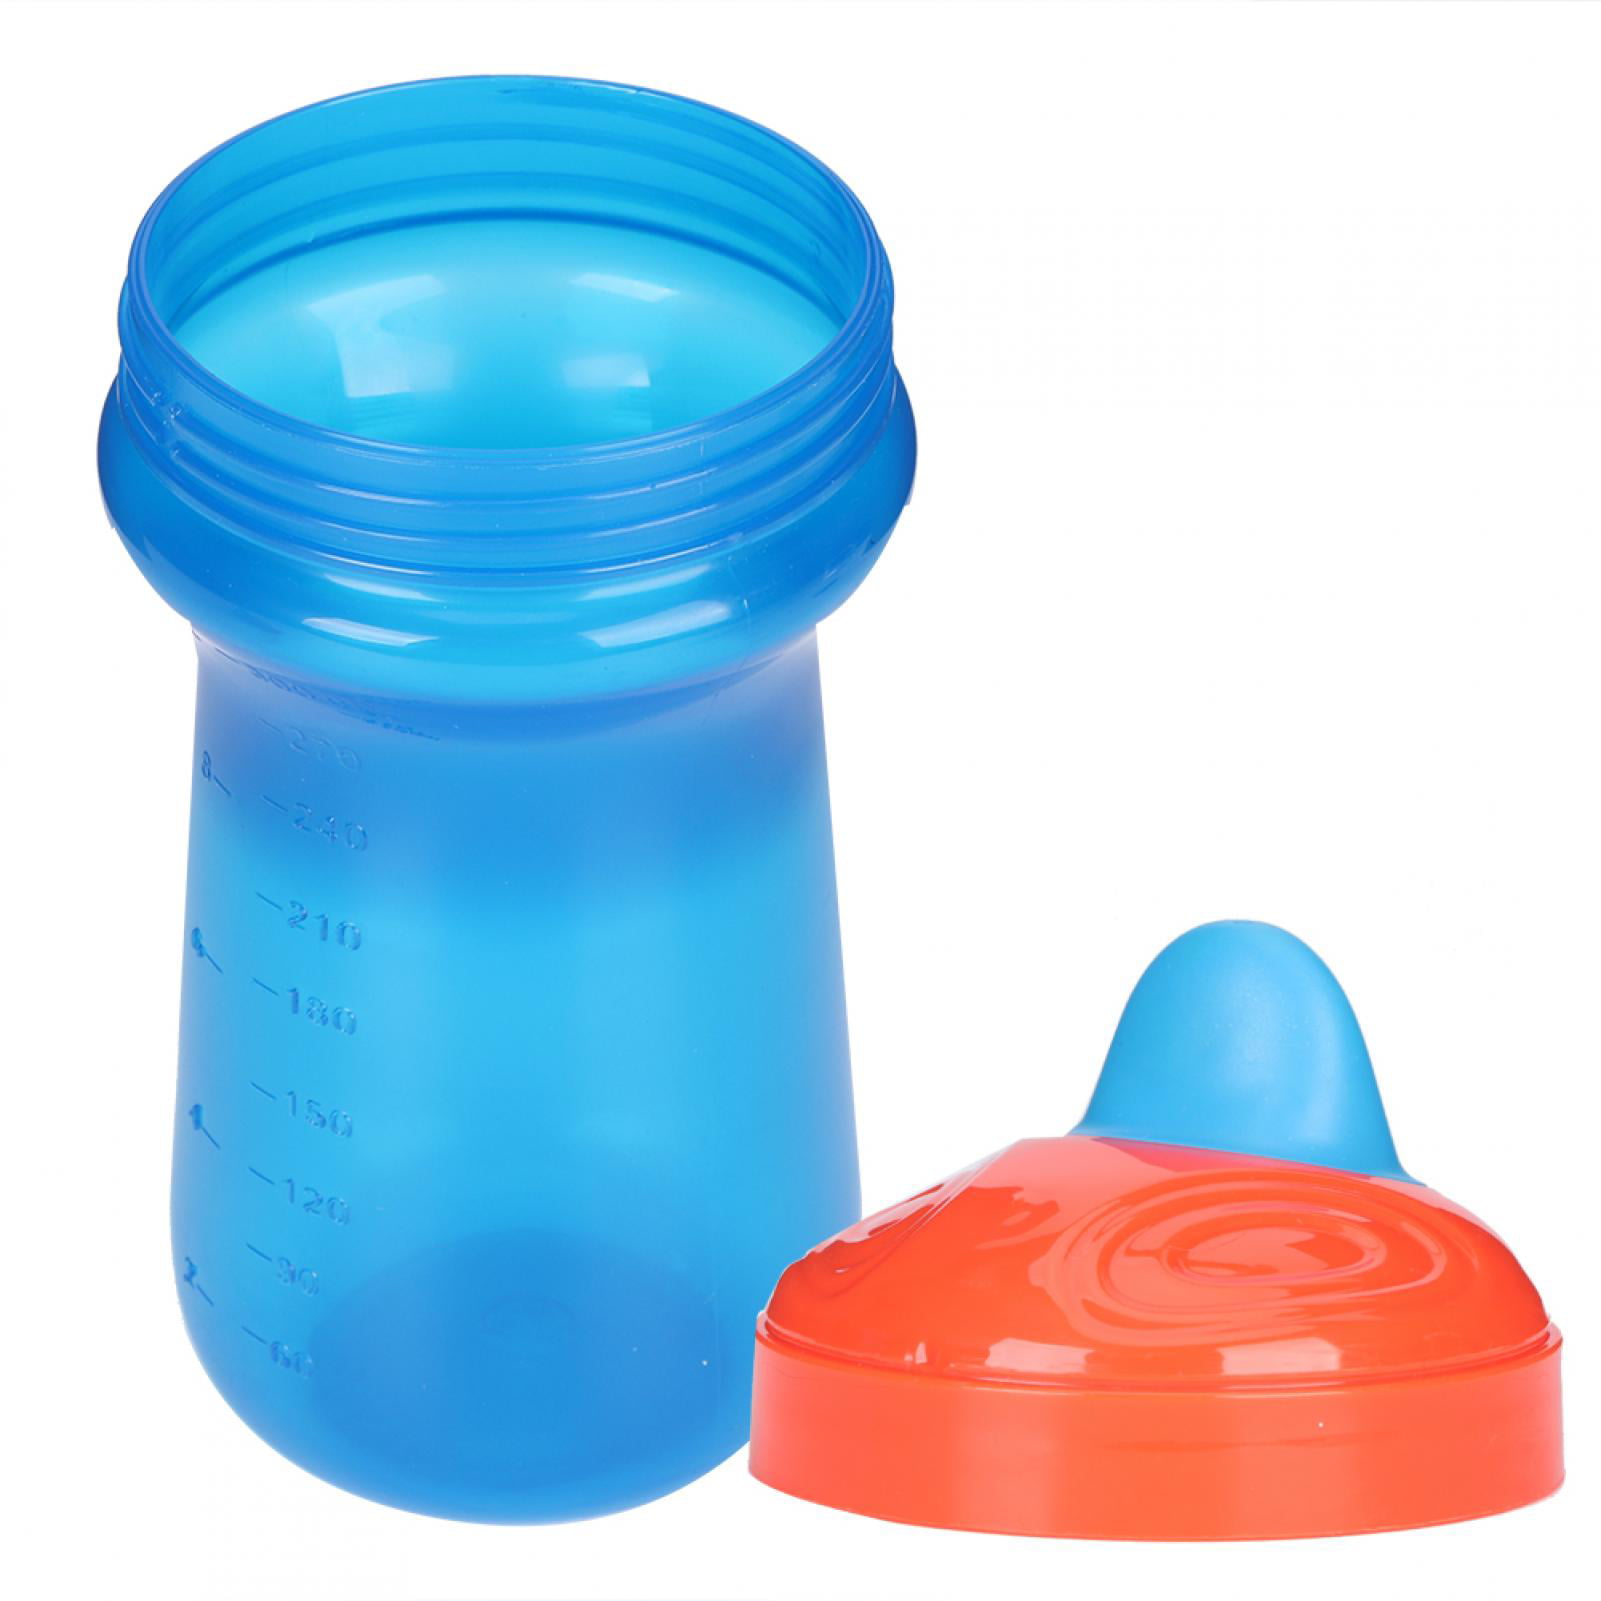 Details about   Eating Tools Drinking Supplies Baby Water Cups Supplies Tableware Drink Cup KY 